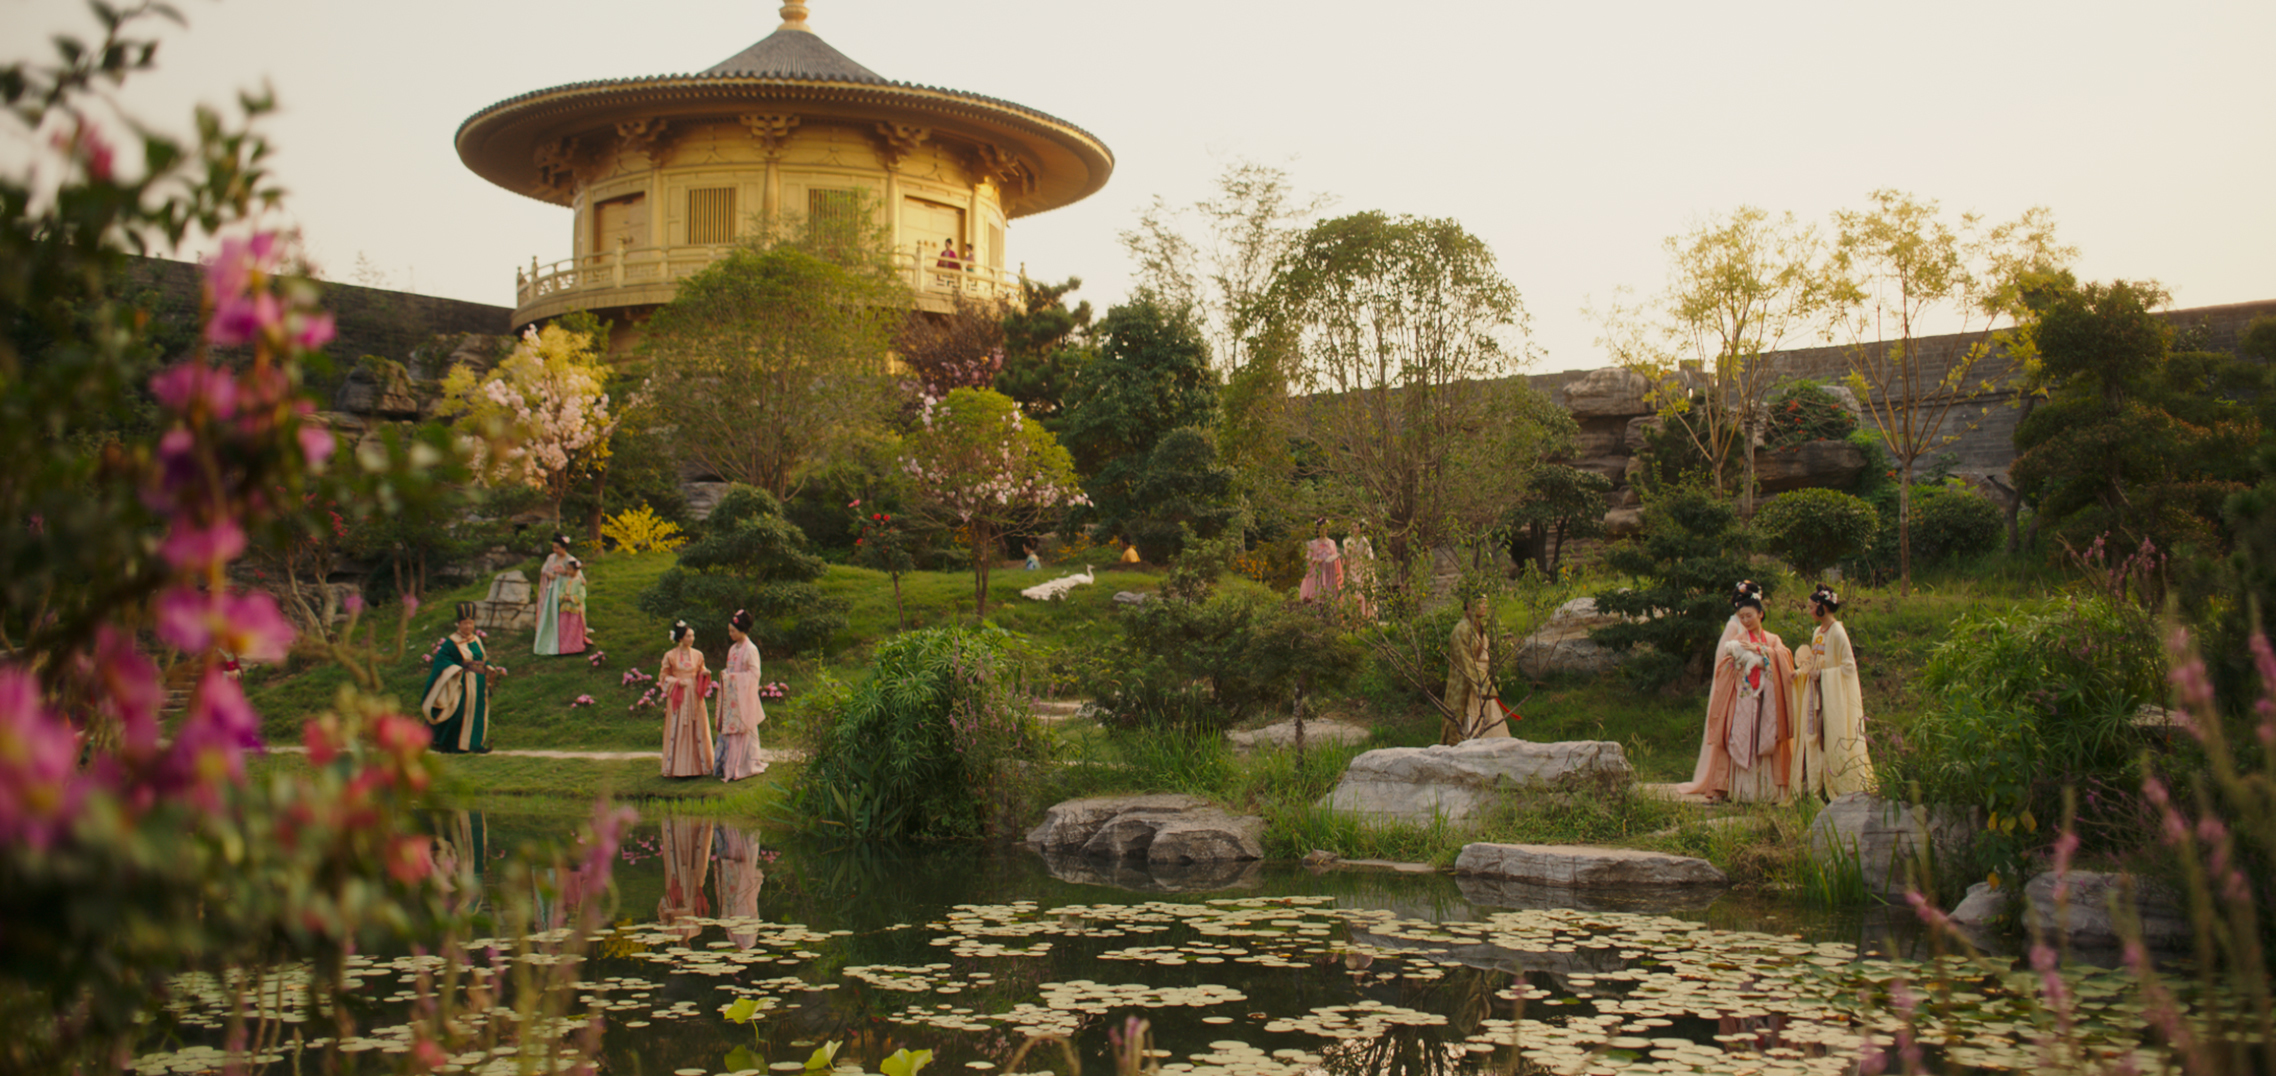 The architecture, costume and geographical setting of Disney's 2020 Mulan adaptation have faced criticism from observers (Courtesy Disney Enterprises, Inc.)